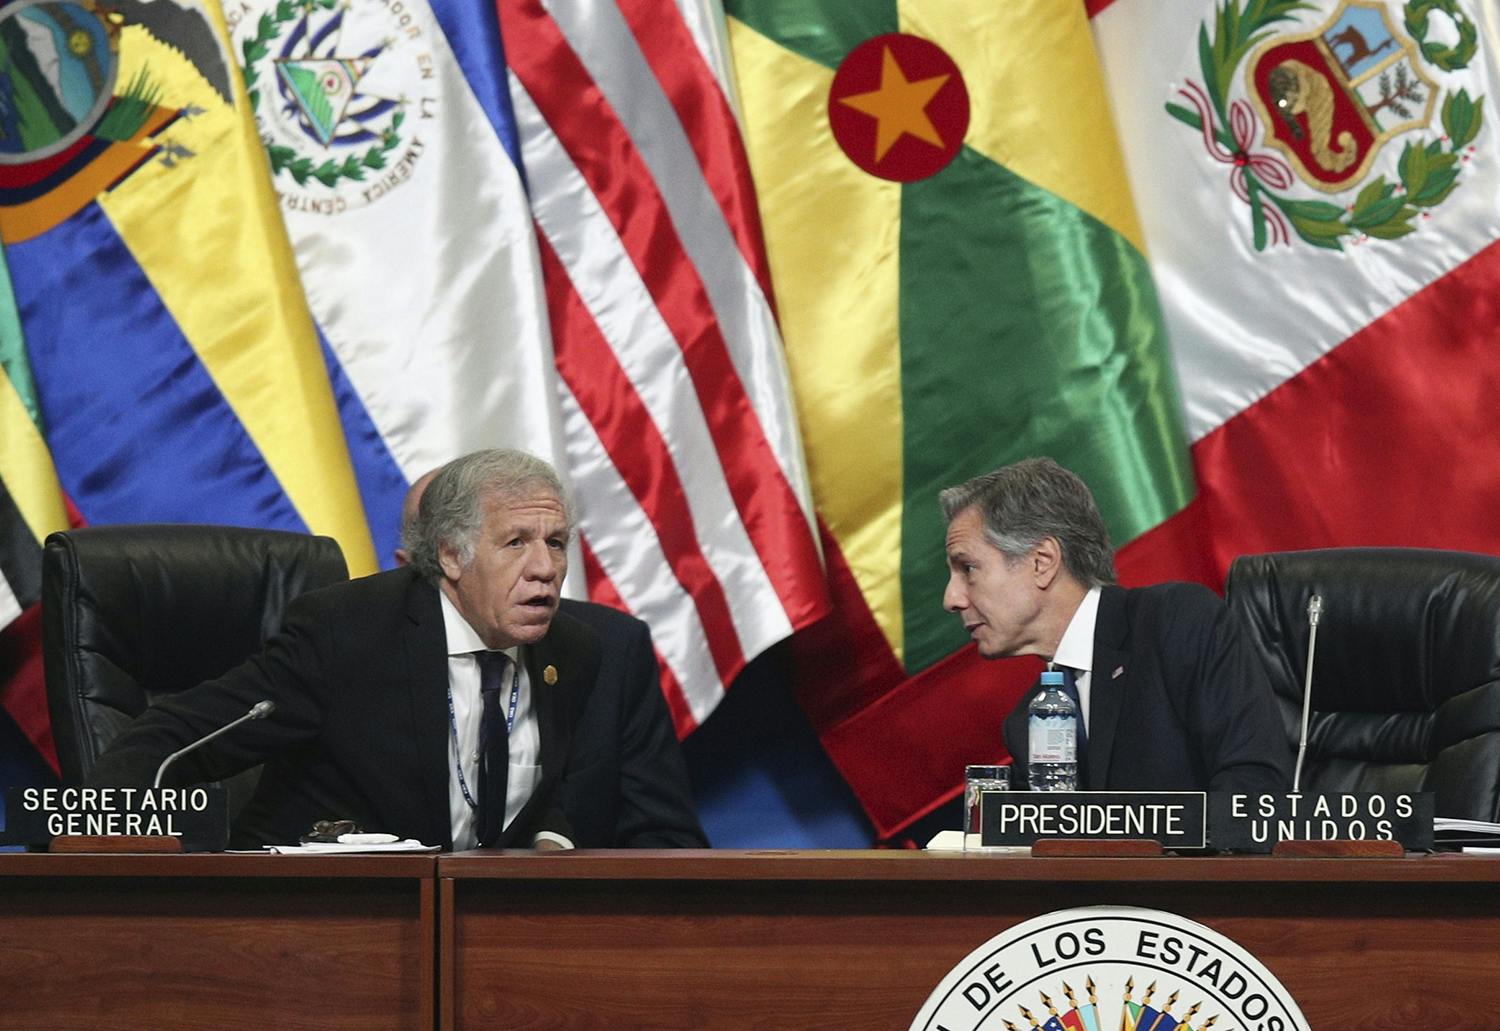 US Secretary of State Antony J. Blinken, right, talks with Secretary General of the Organization of American States (OAS) Luis Almagro at the 52nd OAS General Assembly in Lima, Peru, Thursday, October 6, 2022. (AP Photo/Guadalupe Pardo).